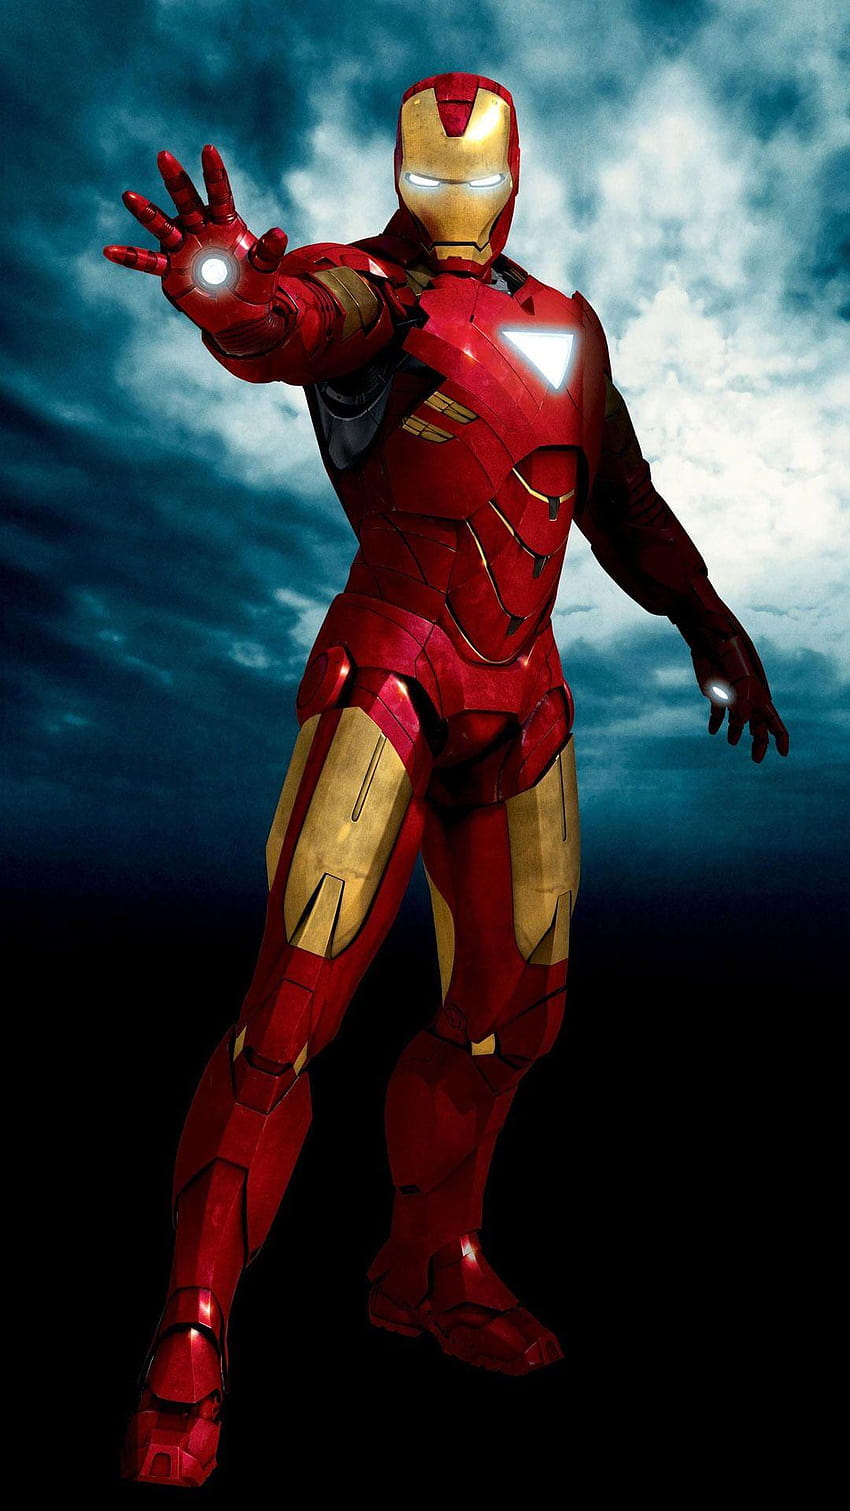 awesome iron man fond d'écran iphone mobile android, iron man for mobile HD phone wallpaper